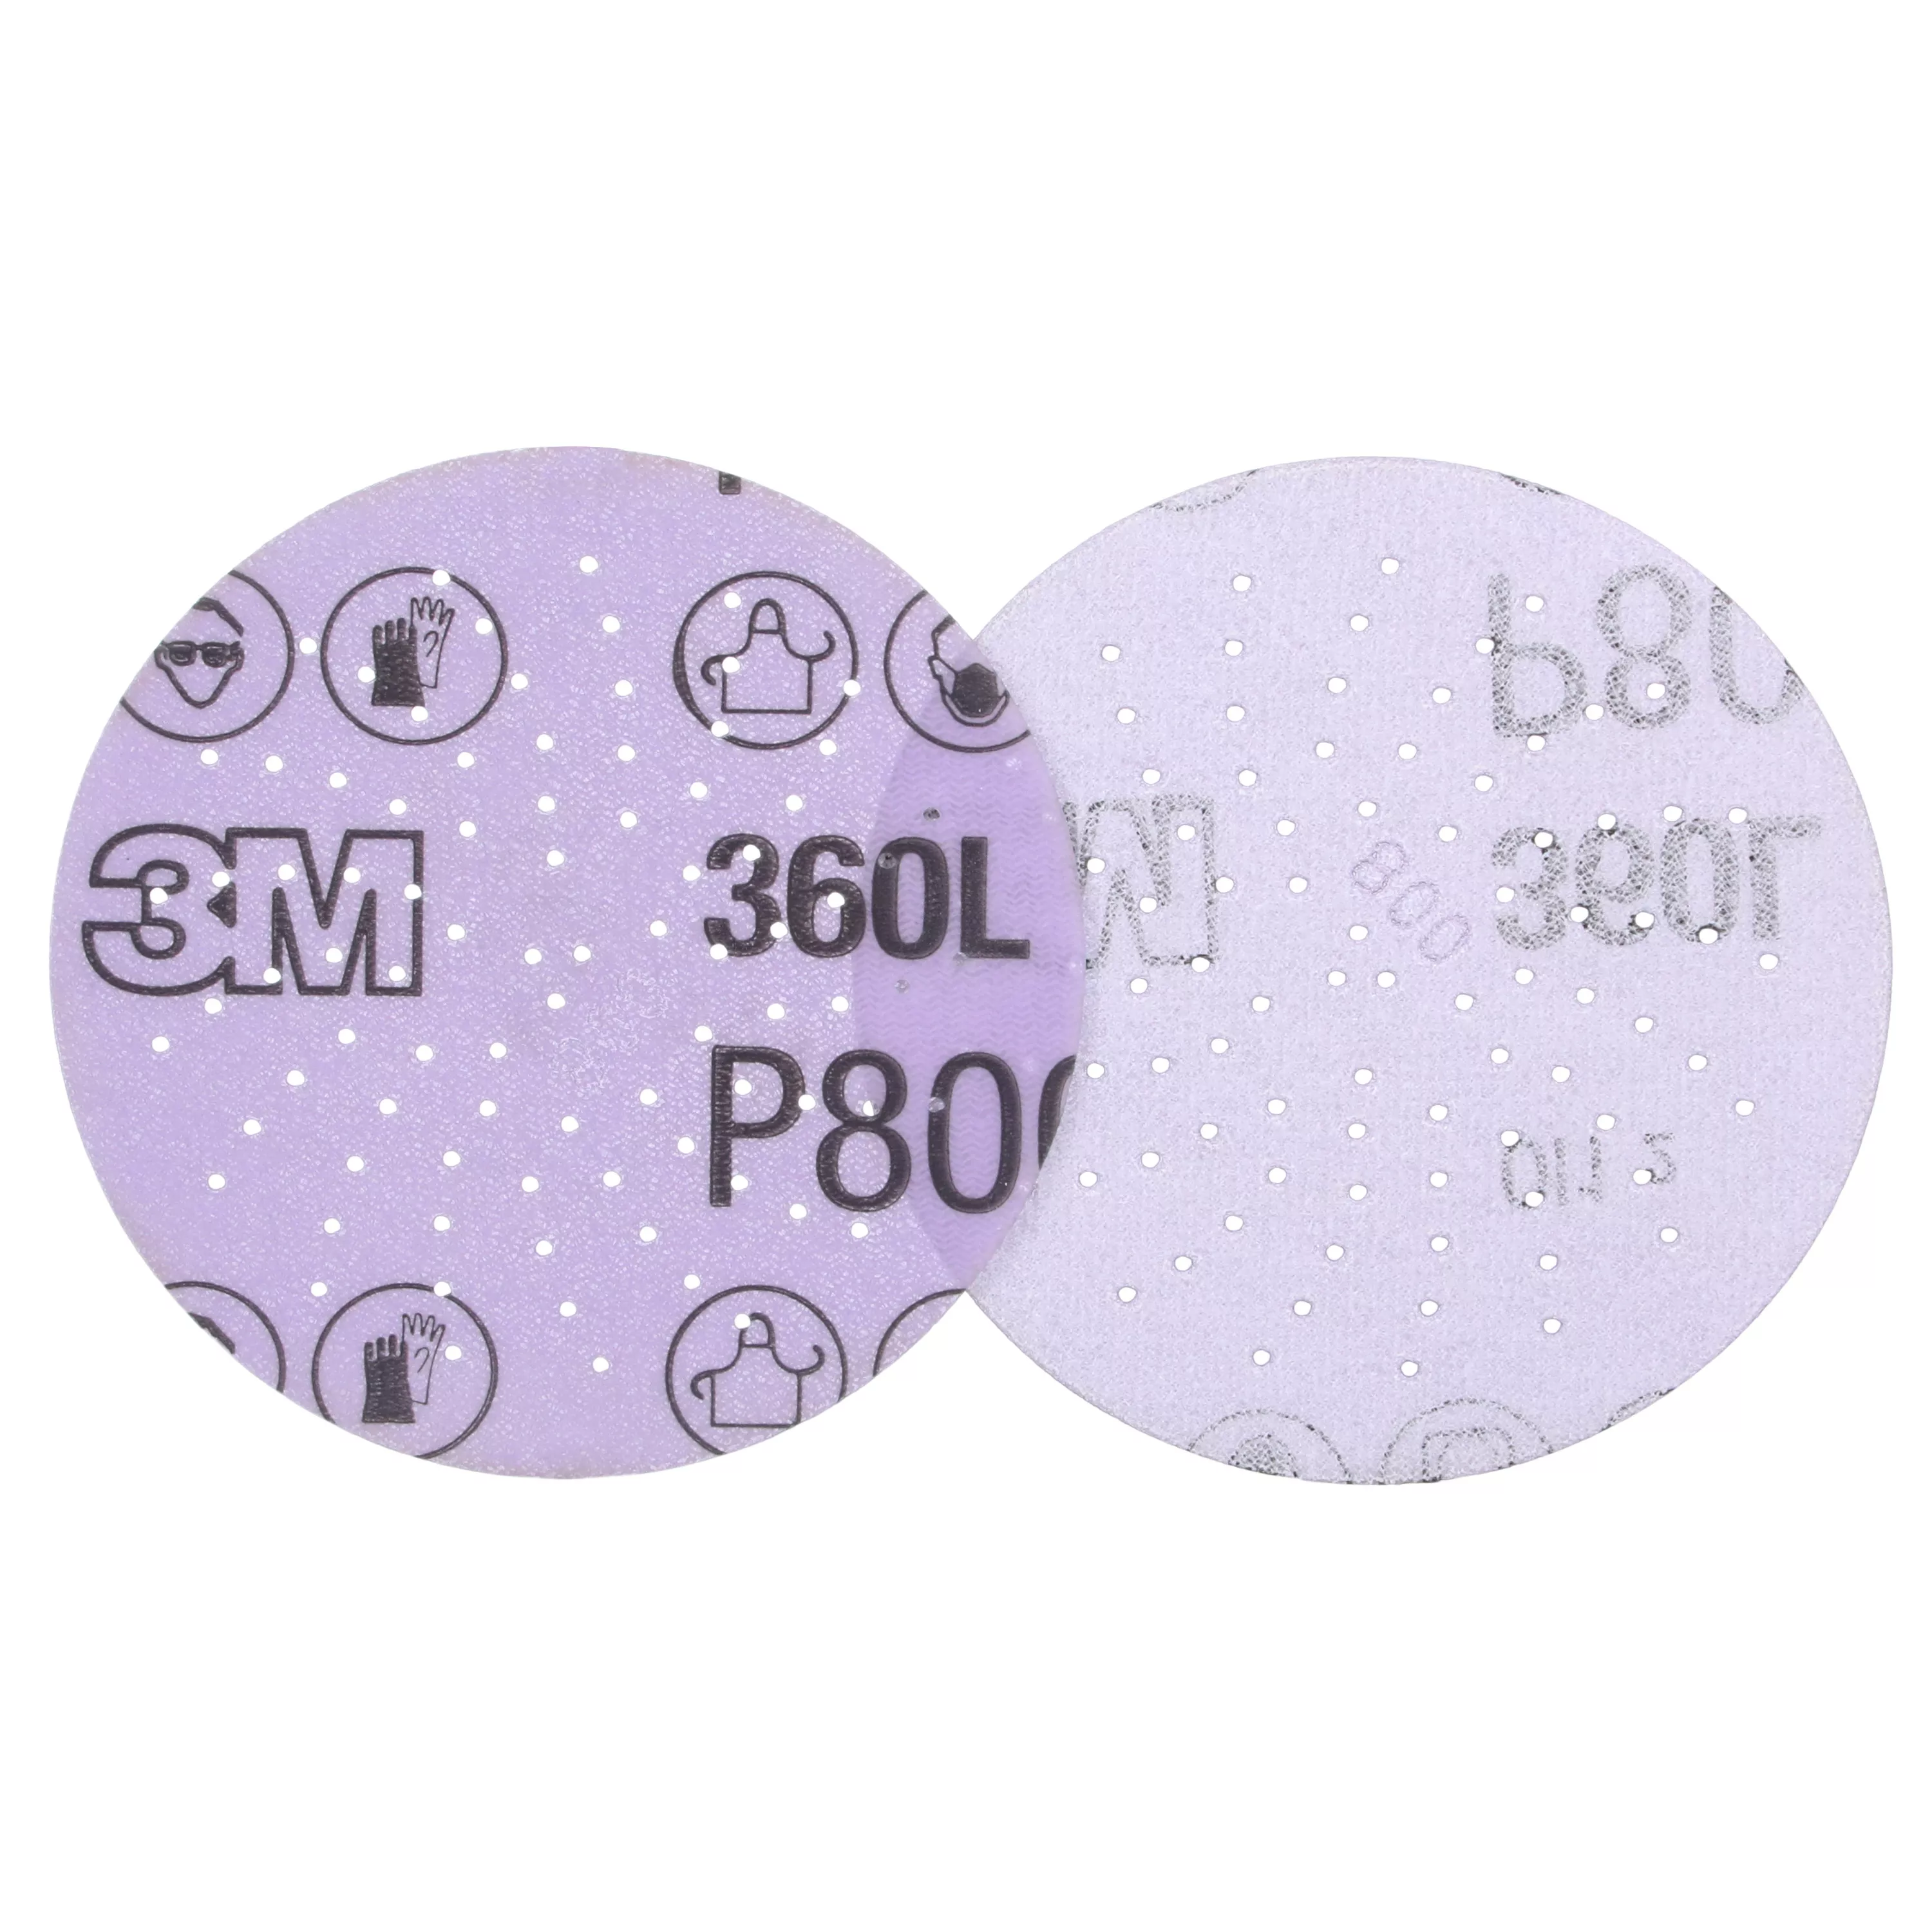 Product Number 360L | 3M Xtract™ Film Disc 360L